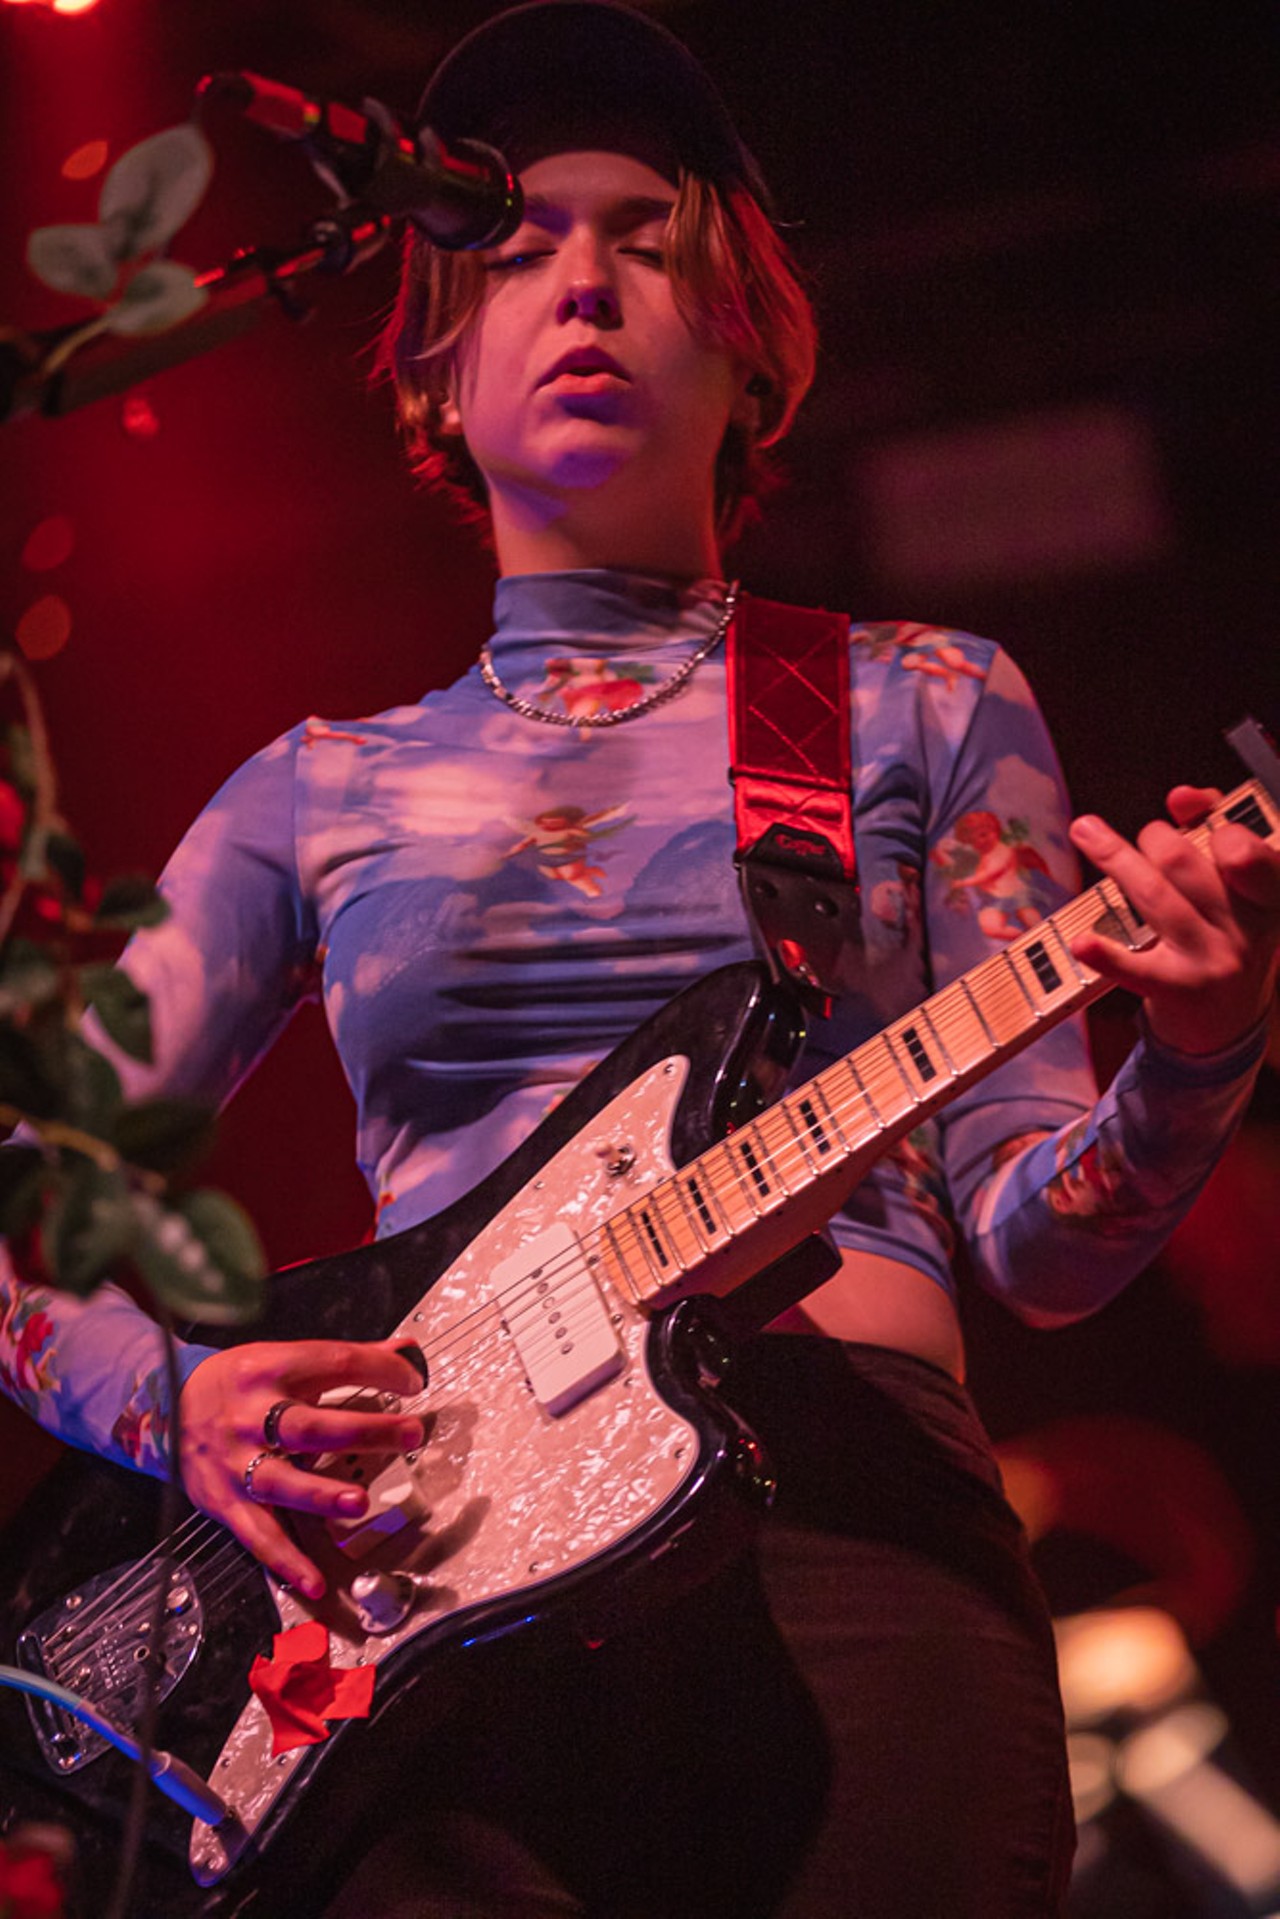 Review: The lights literally go out every time Snail Mail plays Ybor City